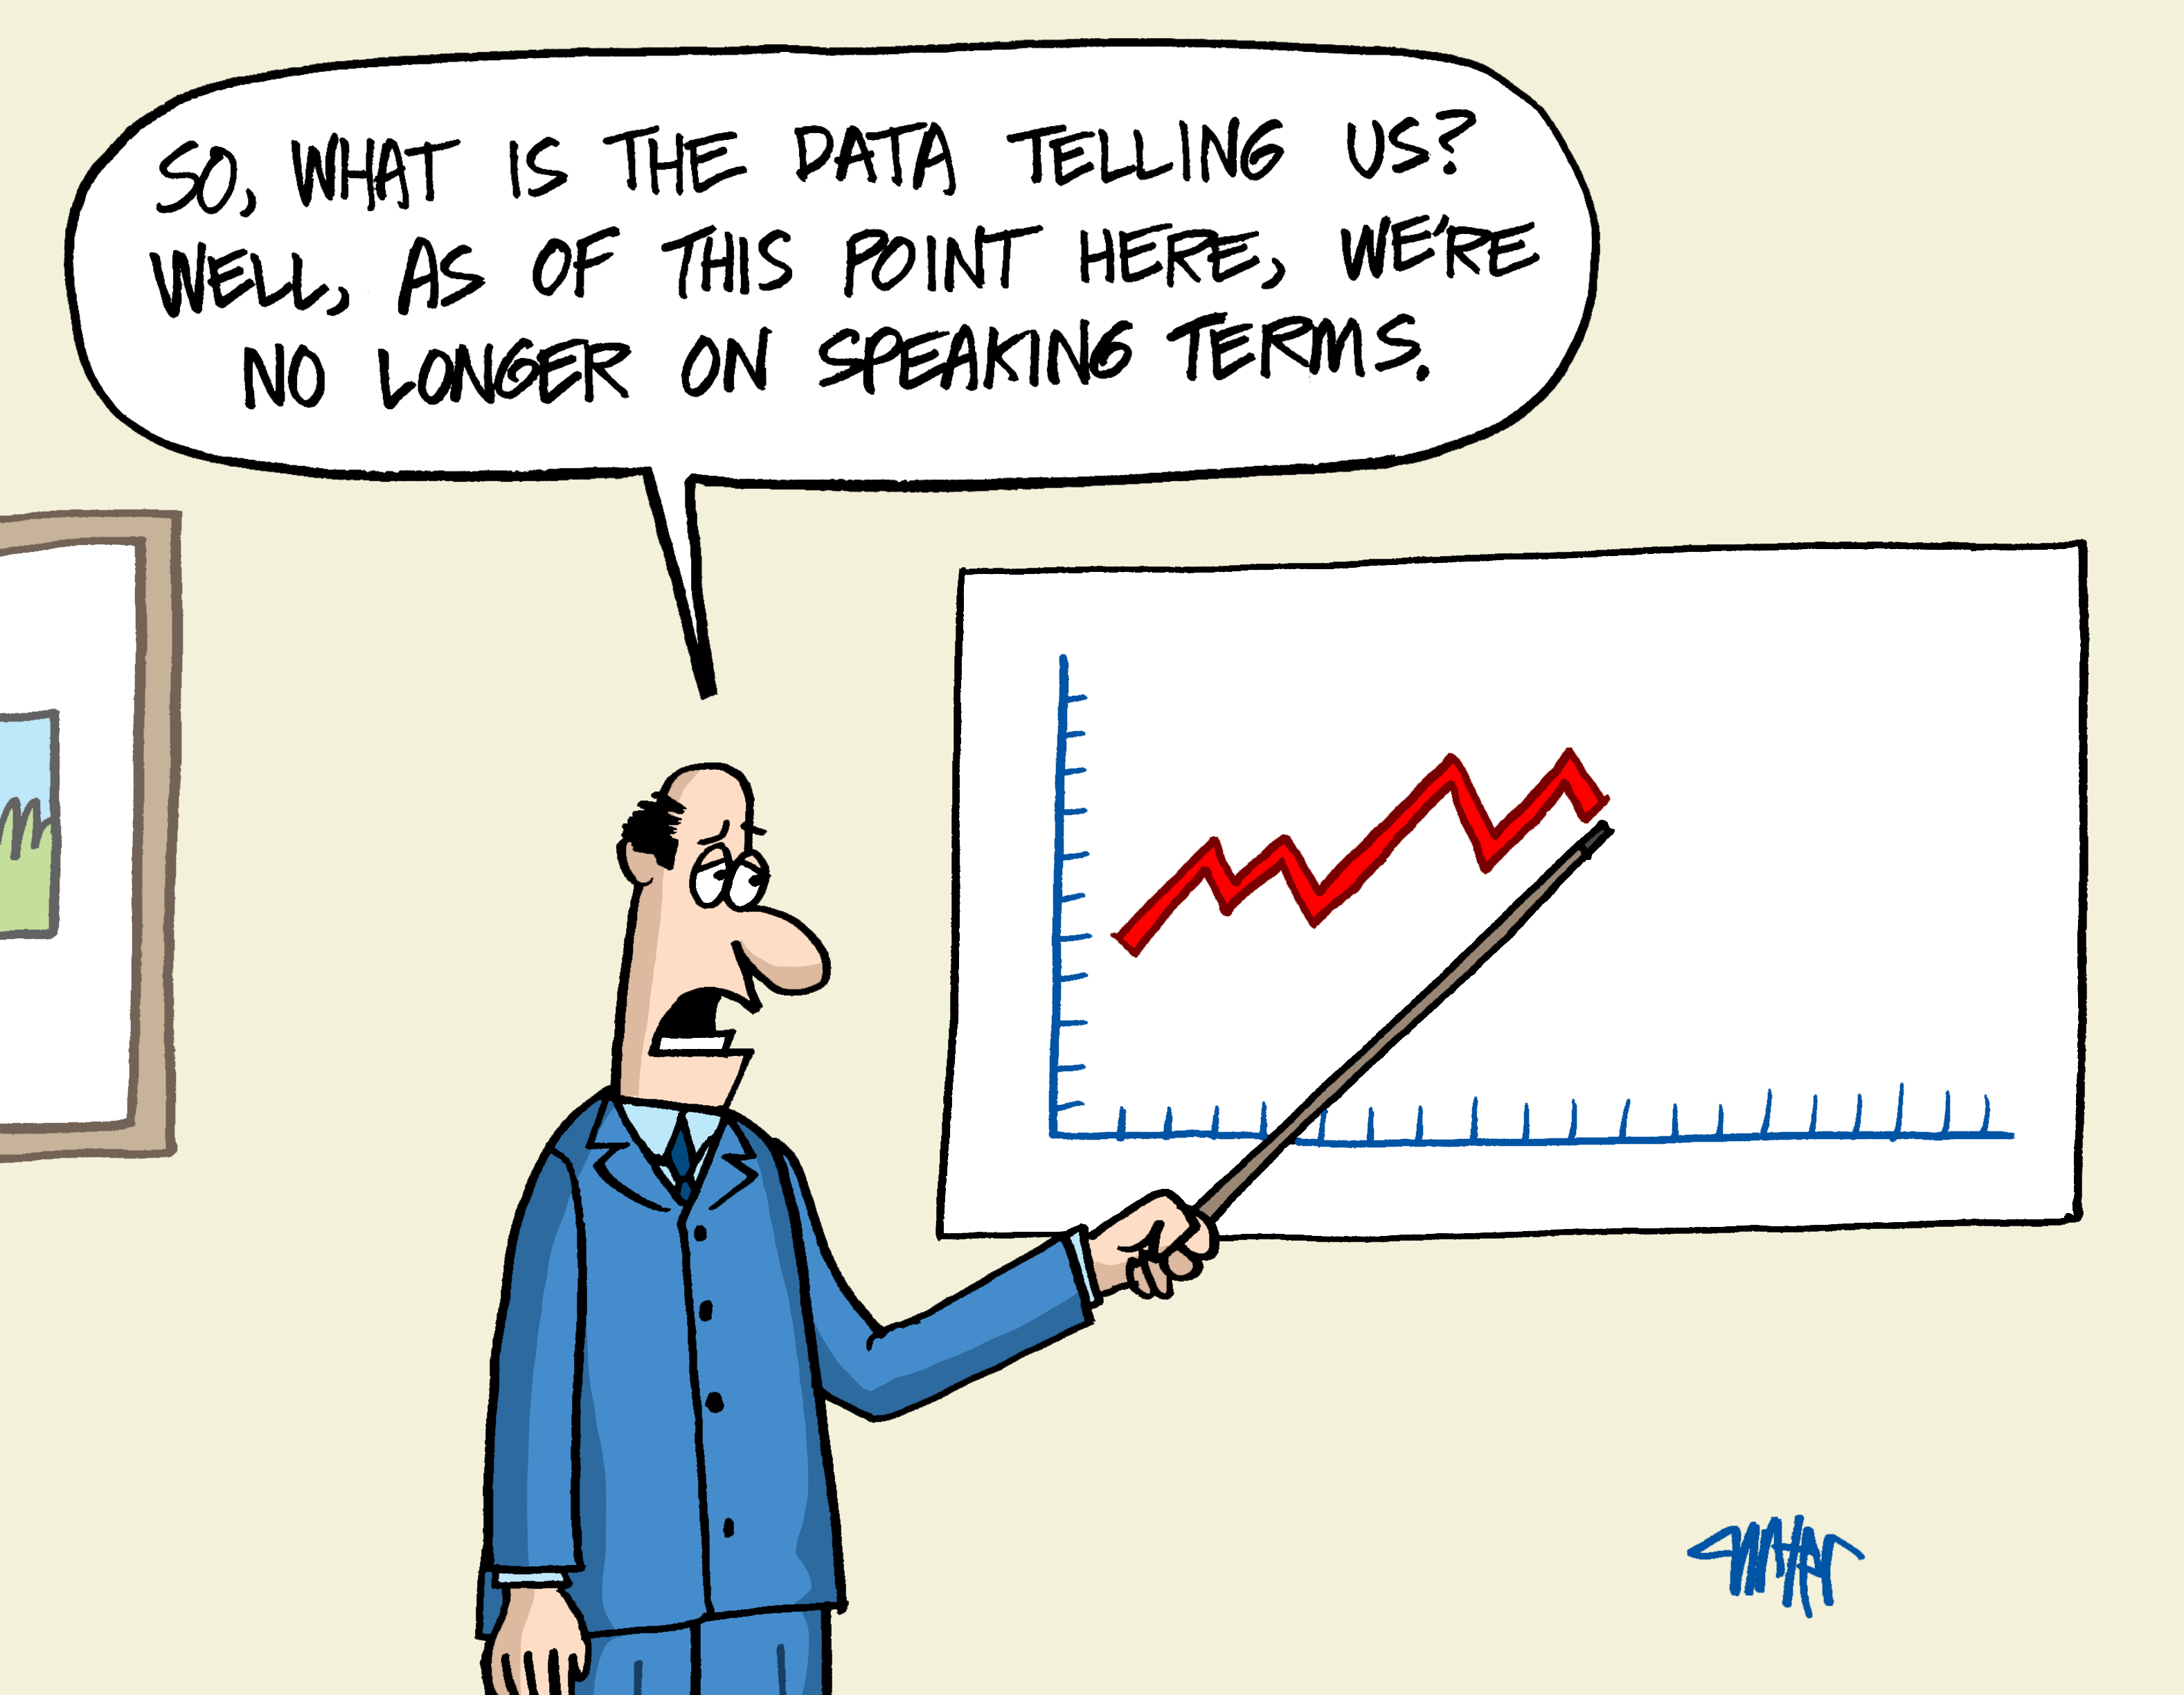 cartoon showing person pointing to the end of a time series plot saying: So, what is the  data telling us? Well, as of this point here, we're no longer on speaking terms.